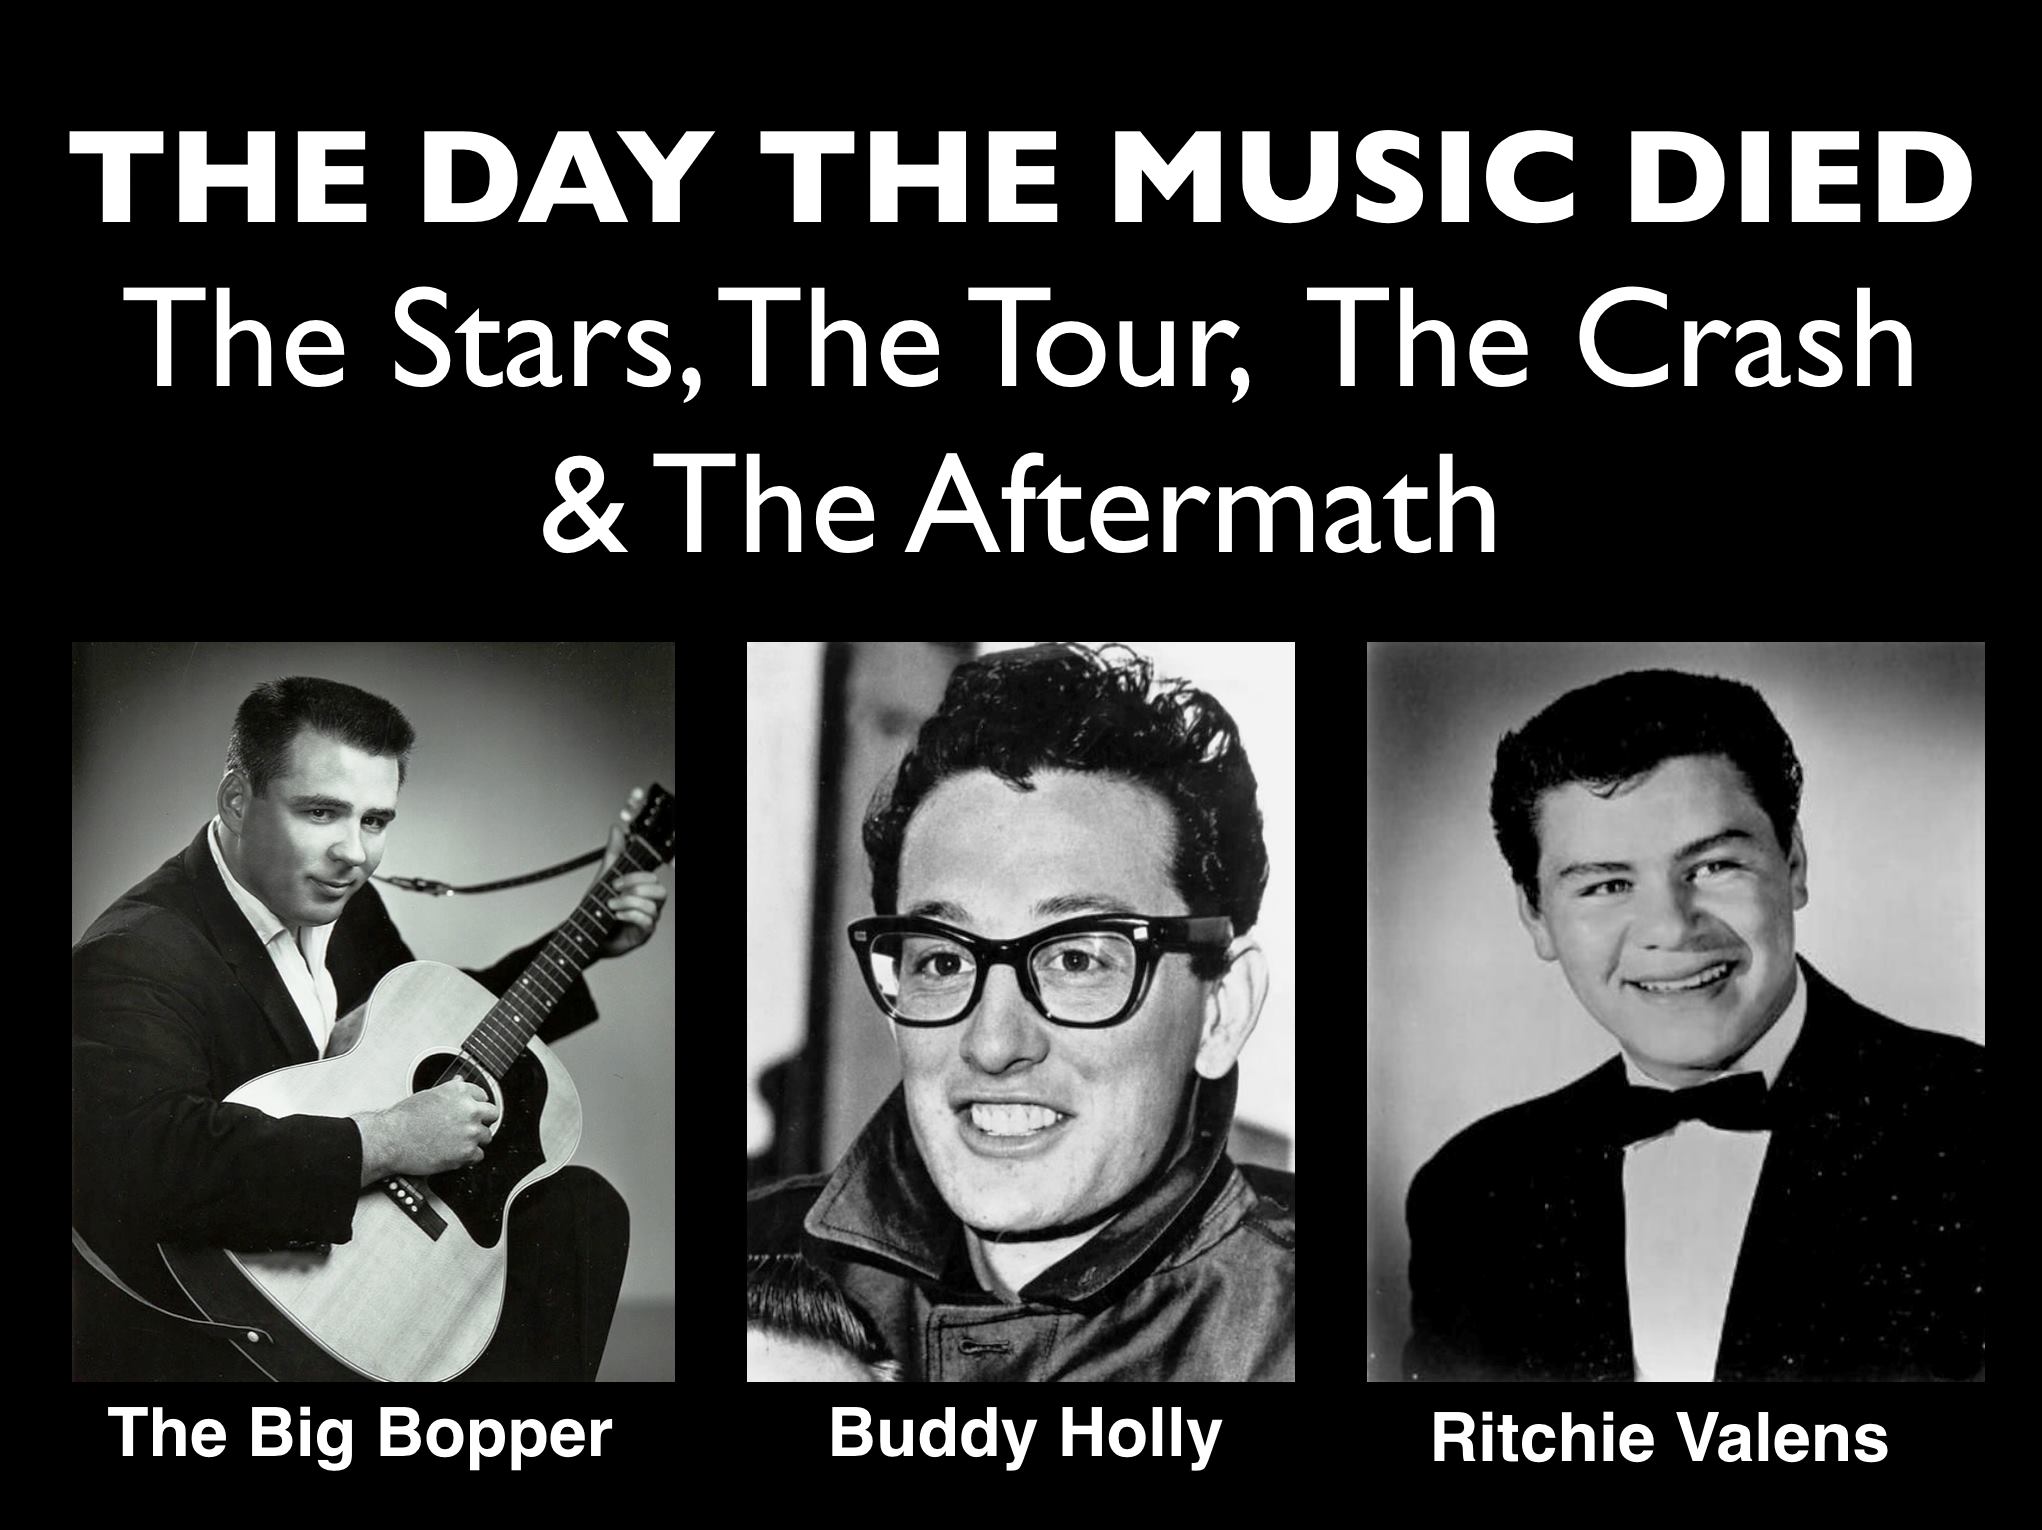 THE DAY THE MUSIC DIED: THE STARS, THE TOUR, THE CRASH & THE AFTERMATH